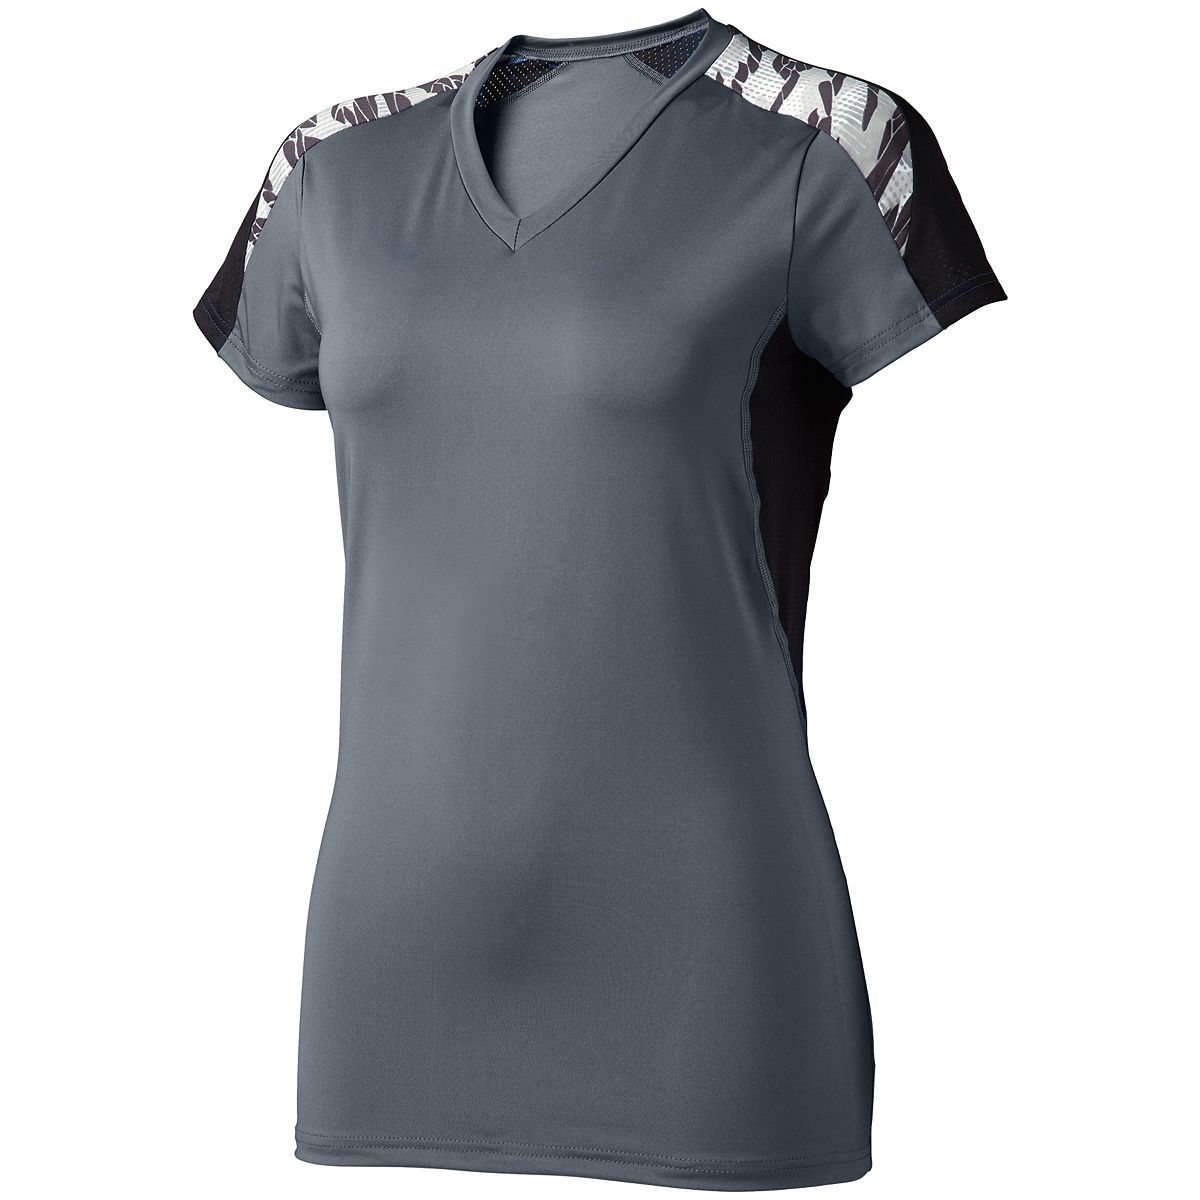 High 5 Ladies Atomic Short Sleeve Jersey in Graphite/Fragment Print/Black  -Part of the Ladies, Ladies-Jersey, High5-Products, Volleyball, Shirts product lines at KanaleyCreations.com